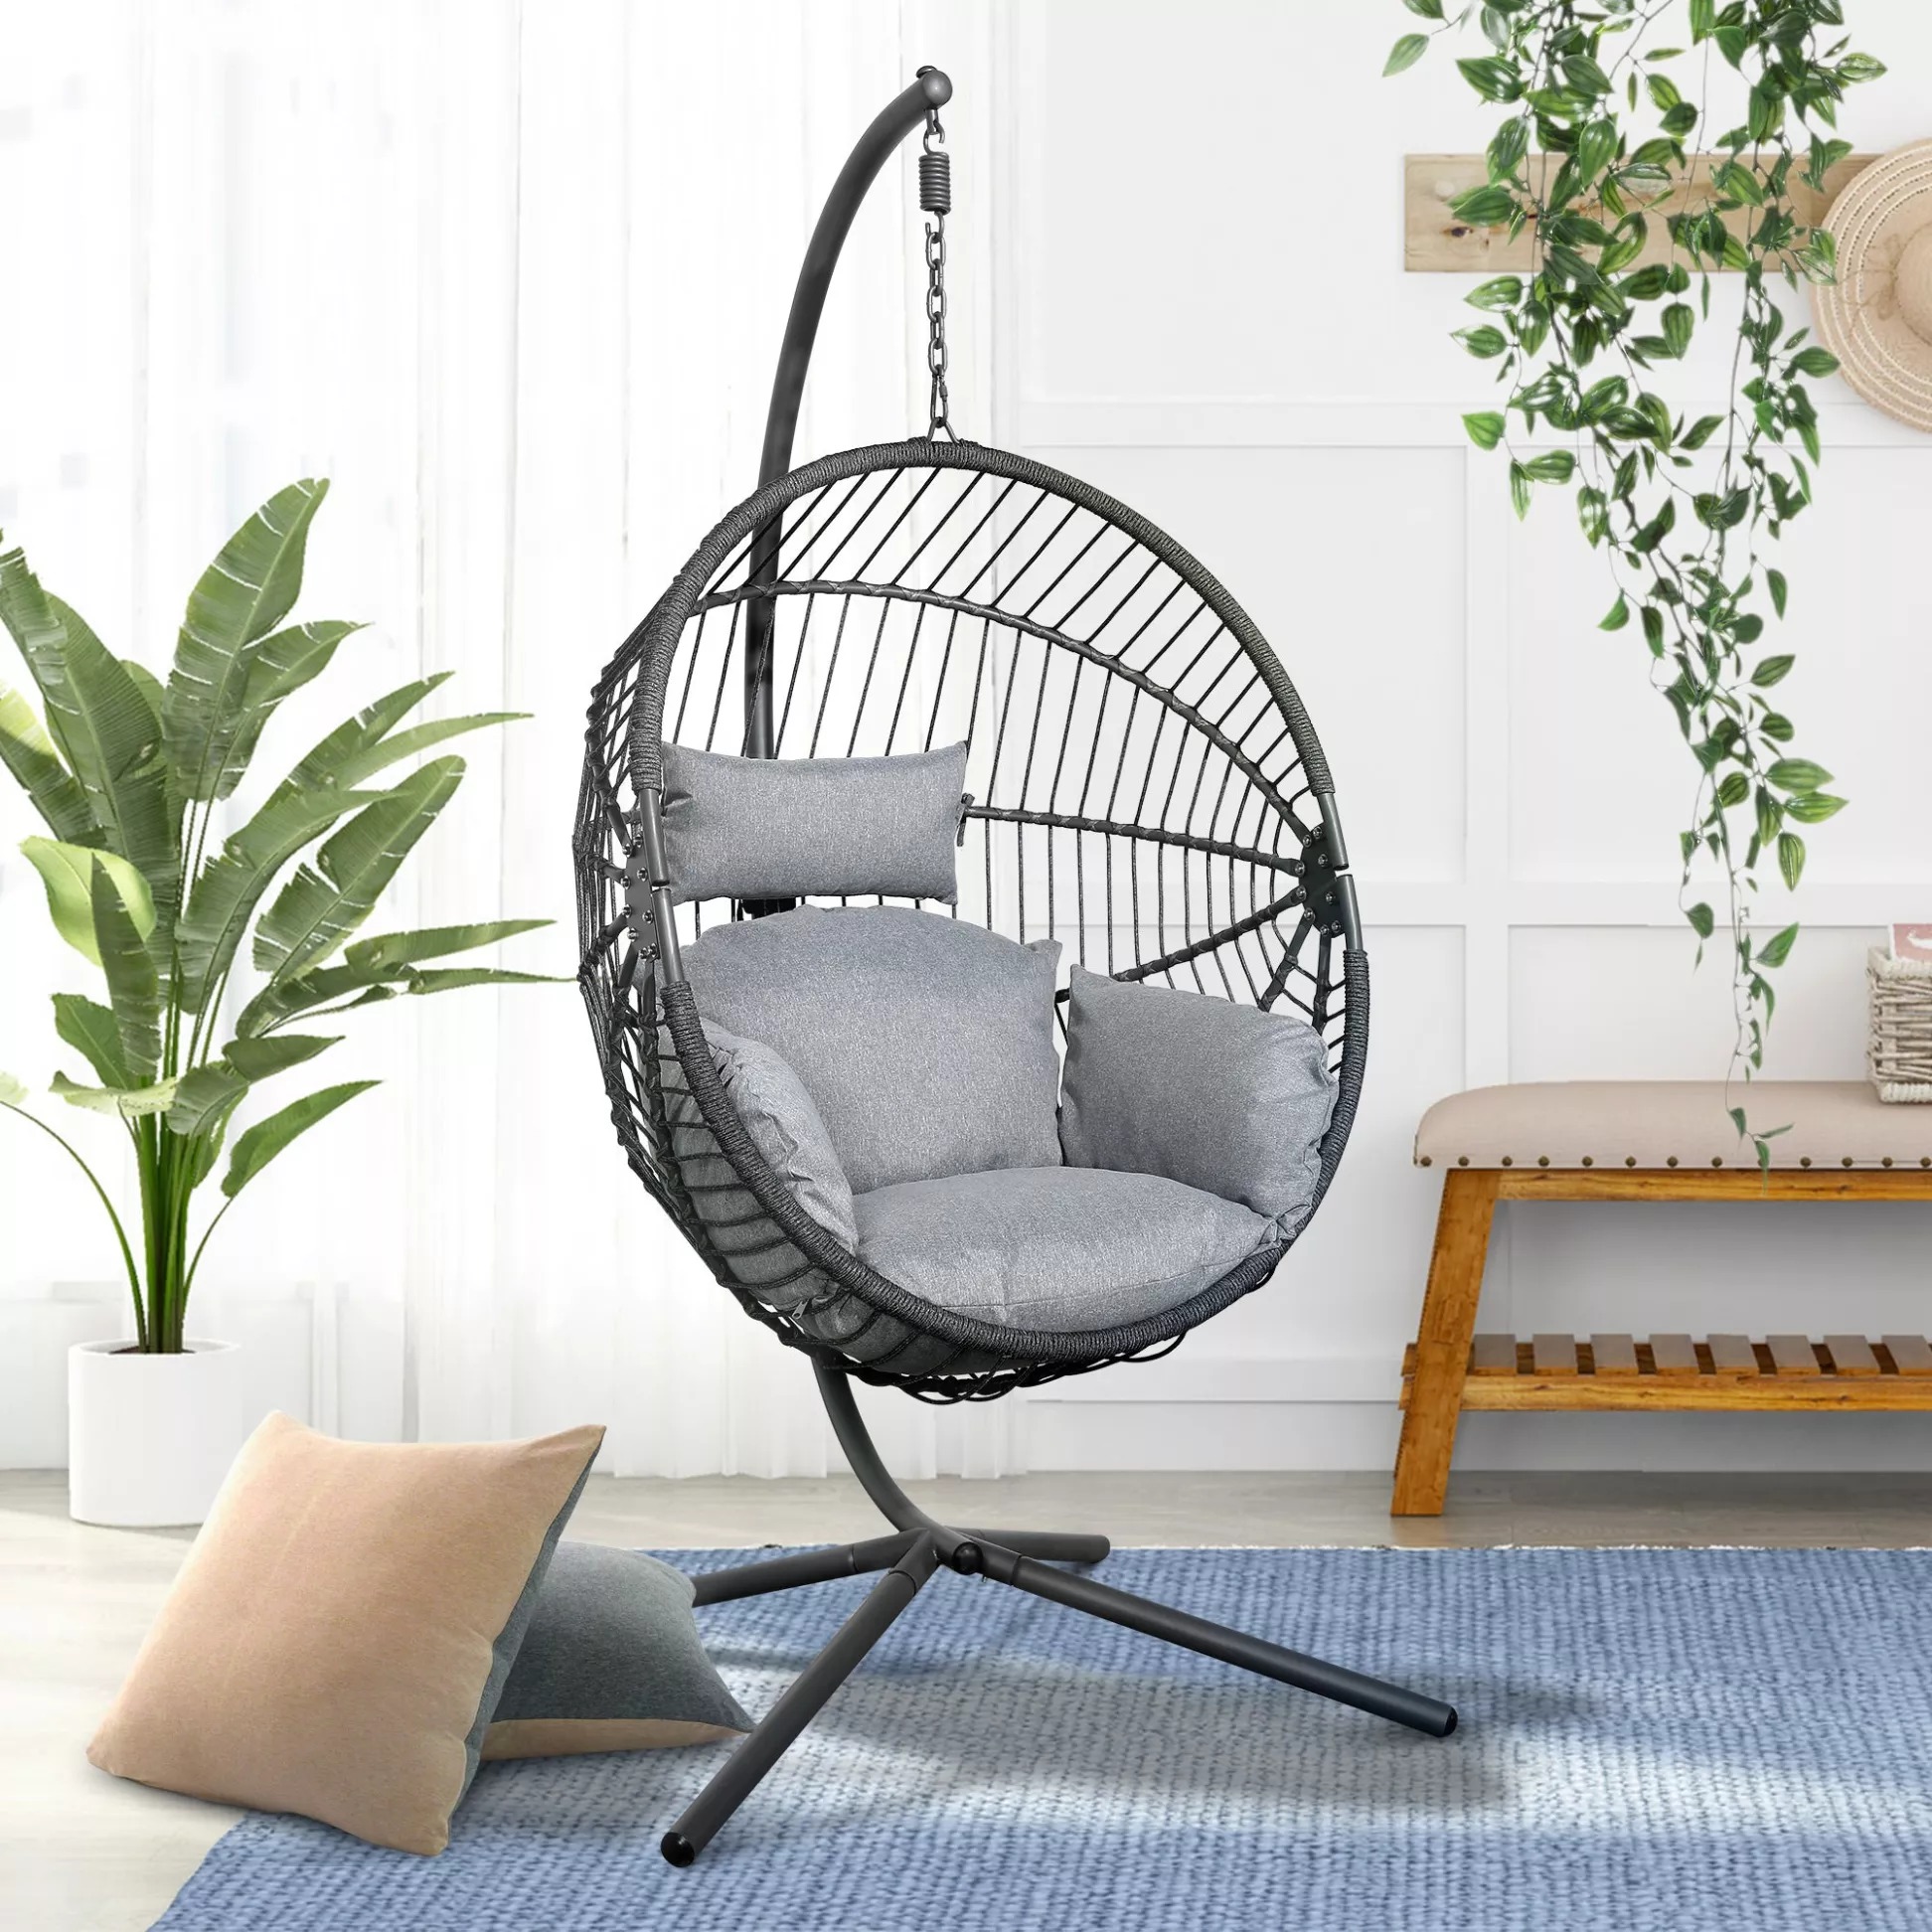 Wicker Hanging Egg Chairs, Outdoor Swing Chair With Stand